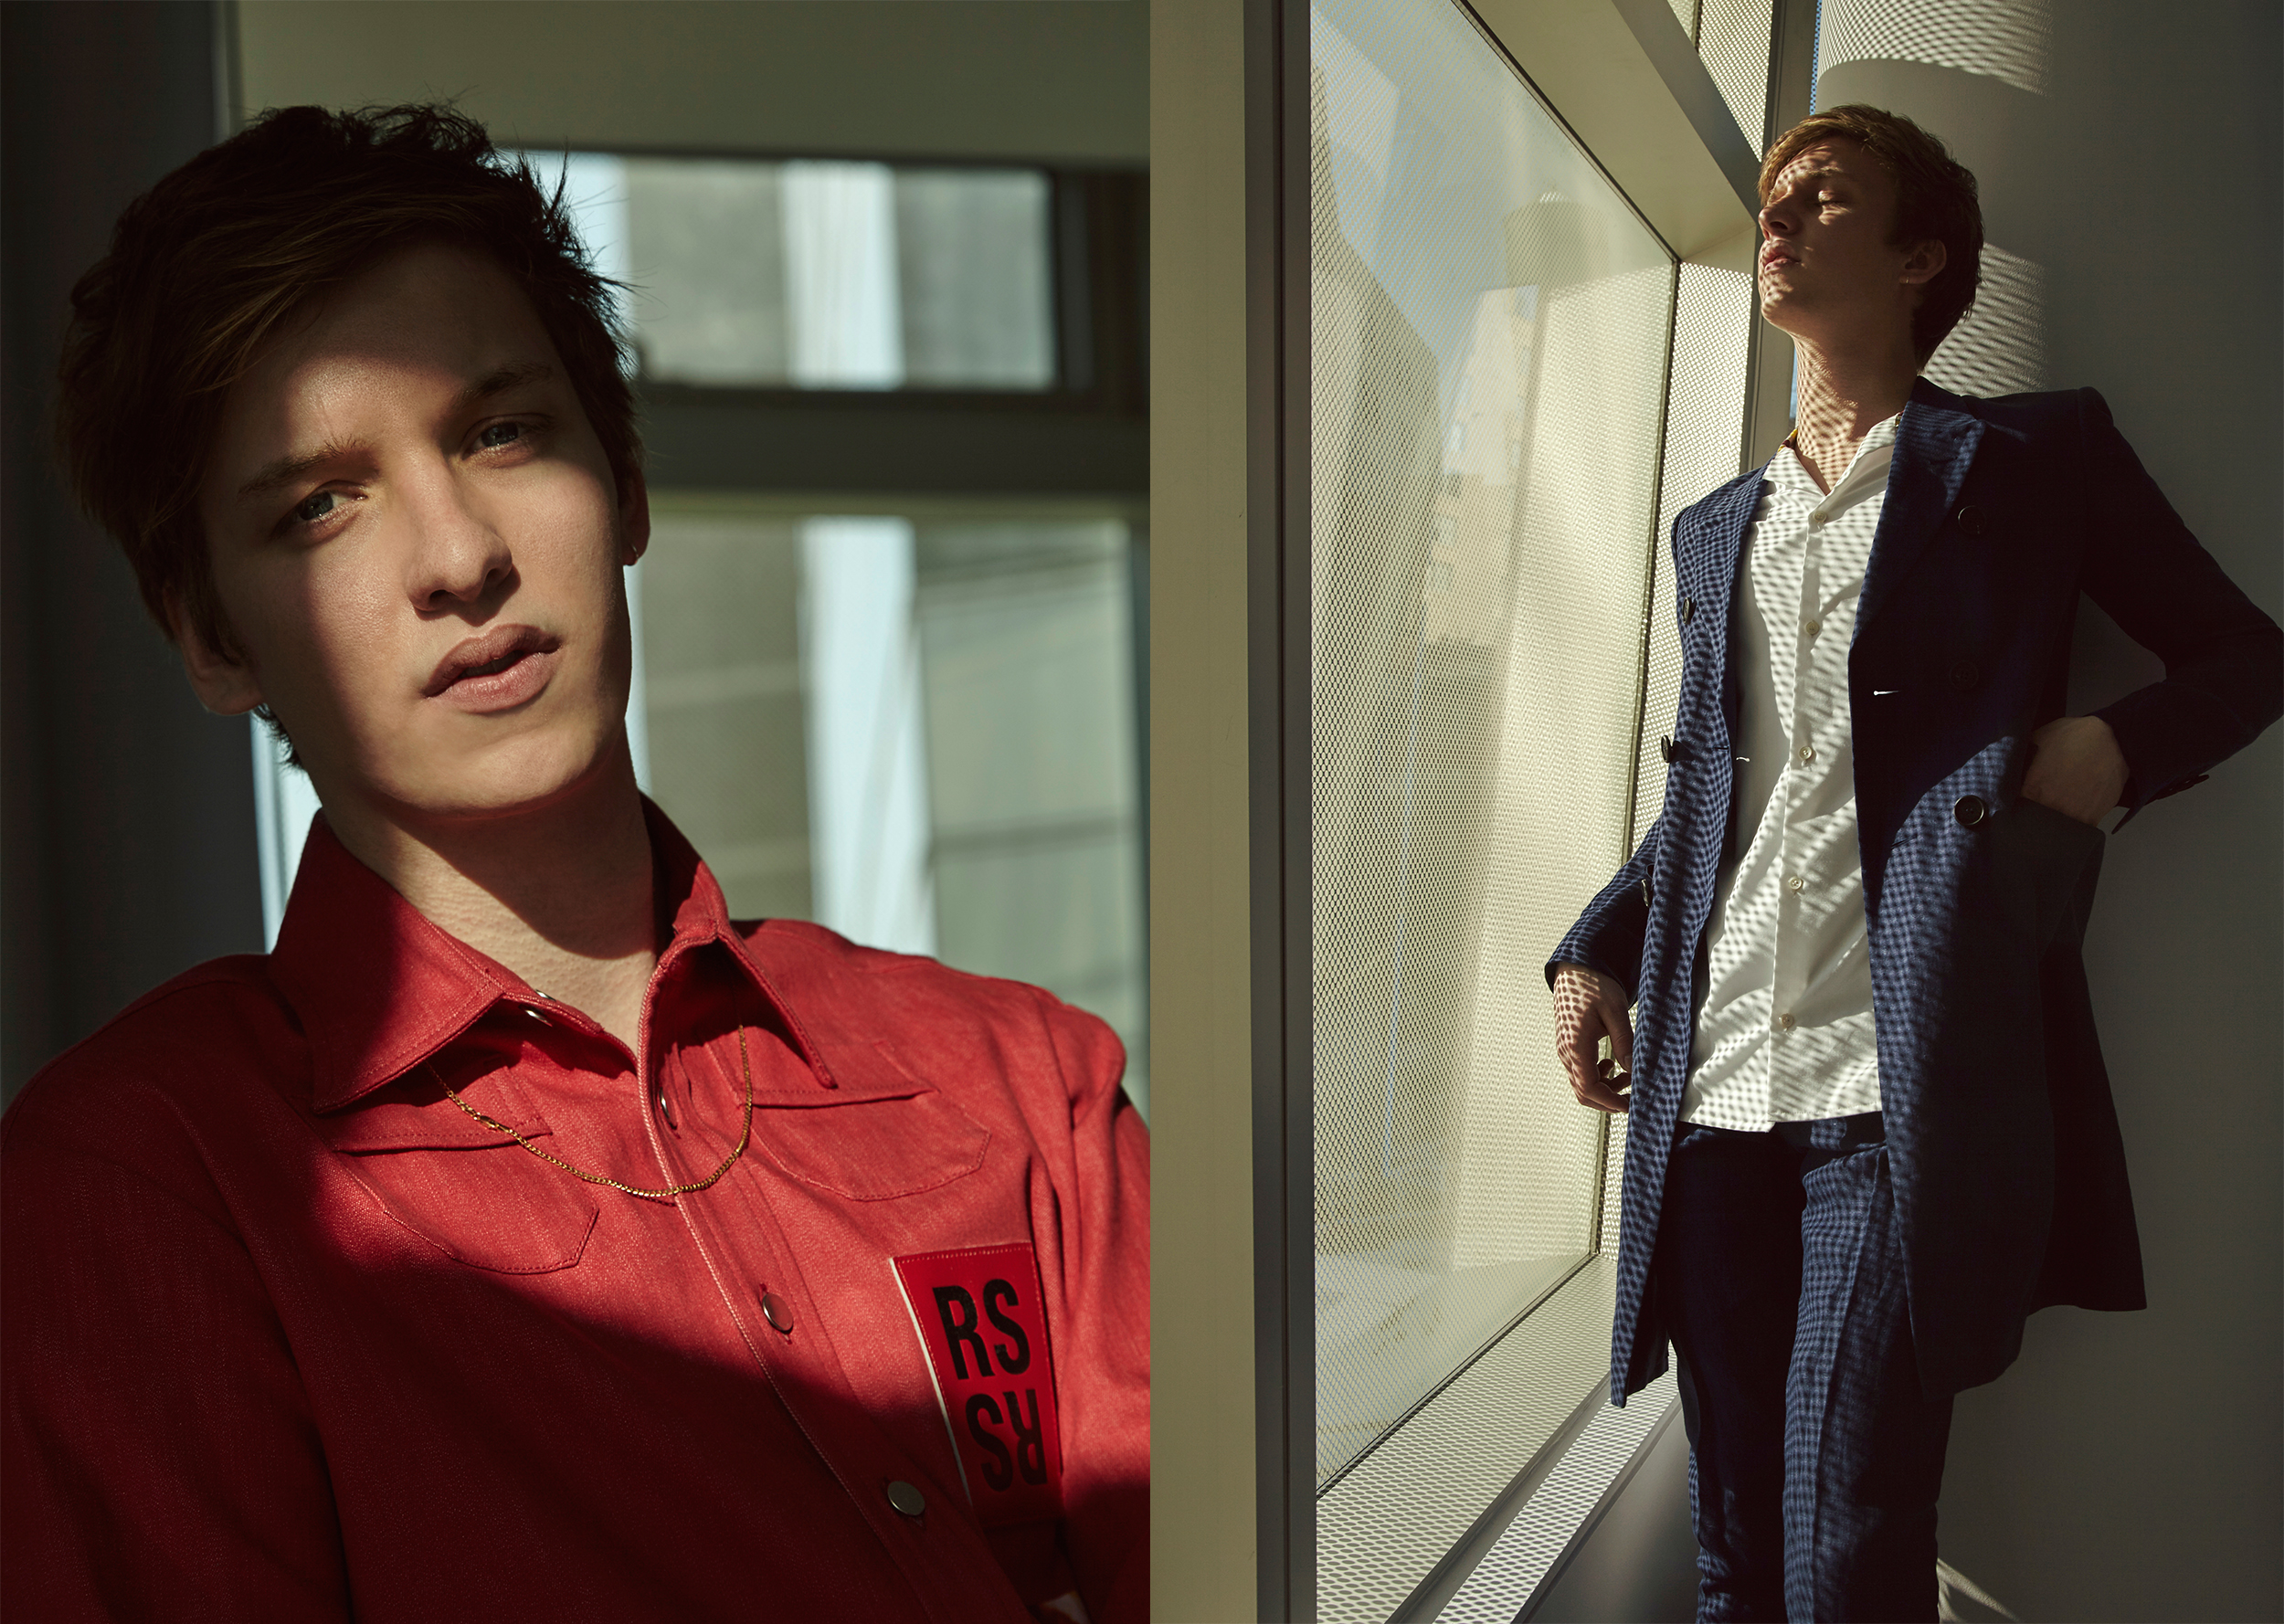 Left: Shirt by Raf Simons. Necklace, Ezra's own. Right: Jacket and trousers by Burberry Prorsum. Shirt by Acne Studios.